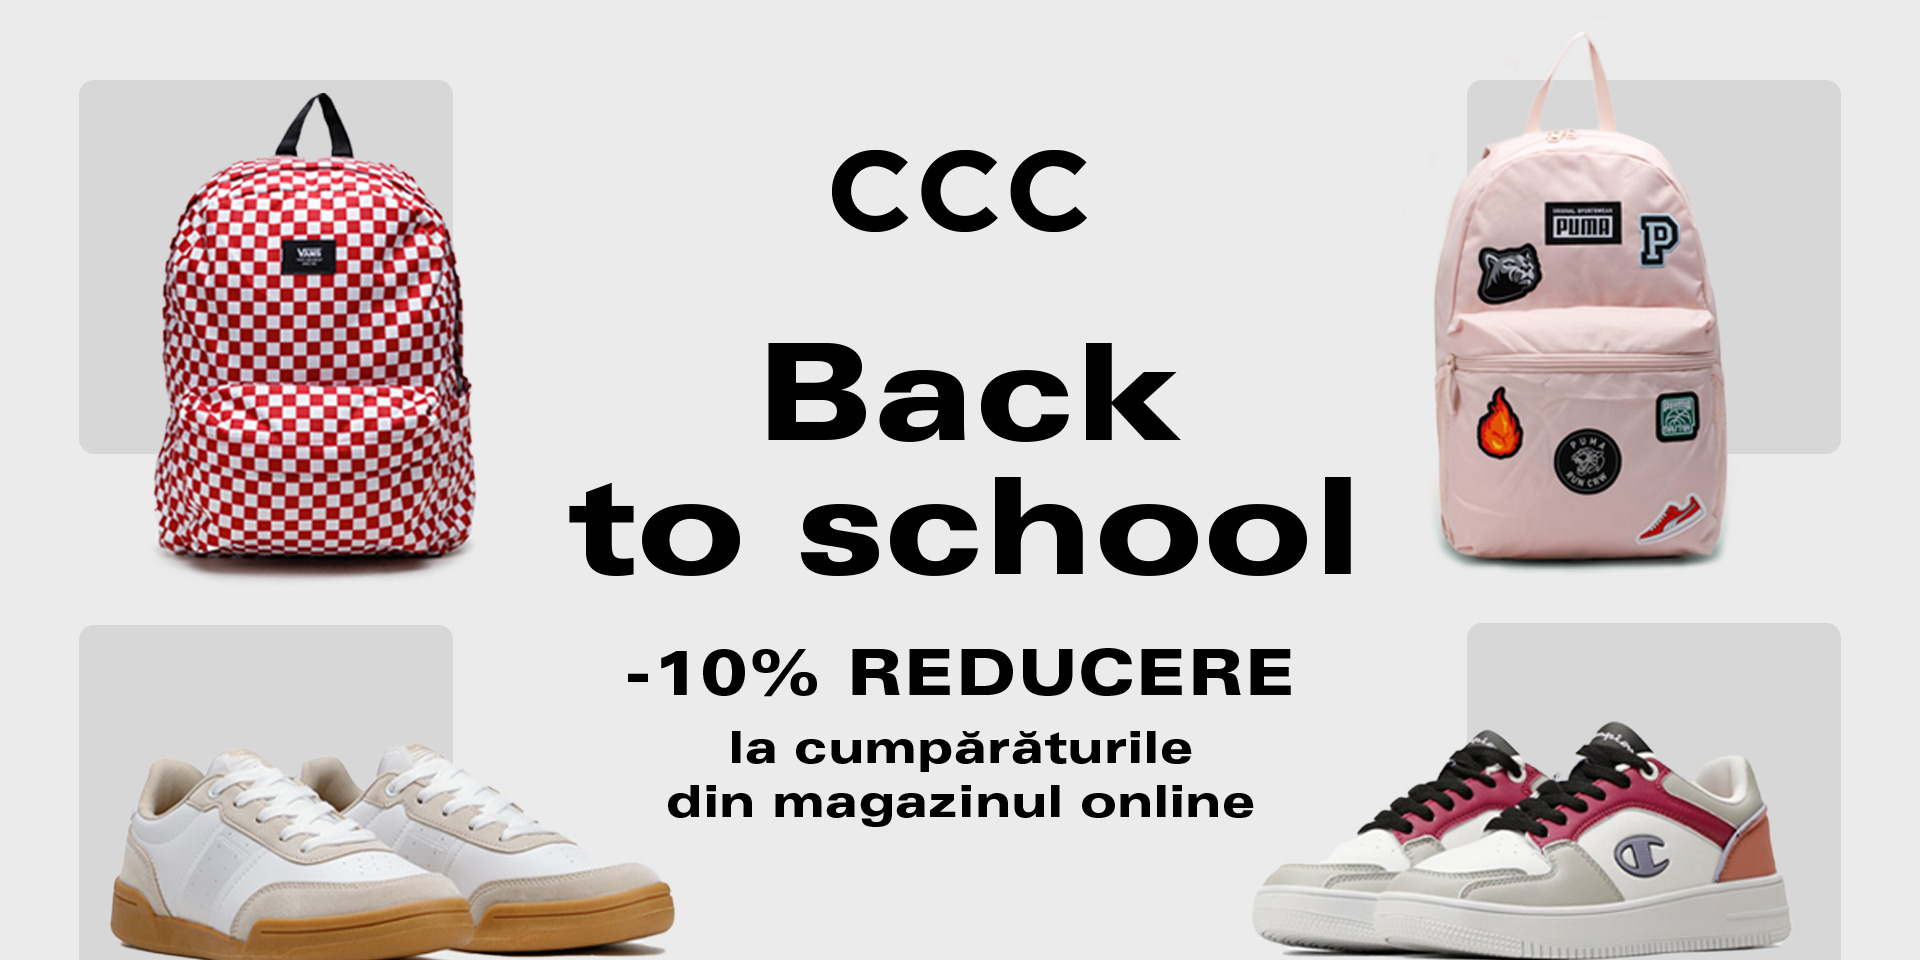 10% on all items on the CCC online store